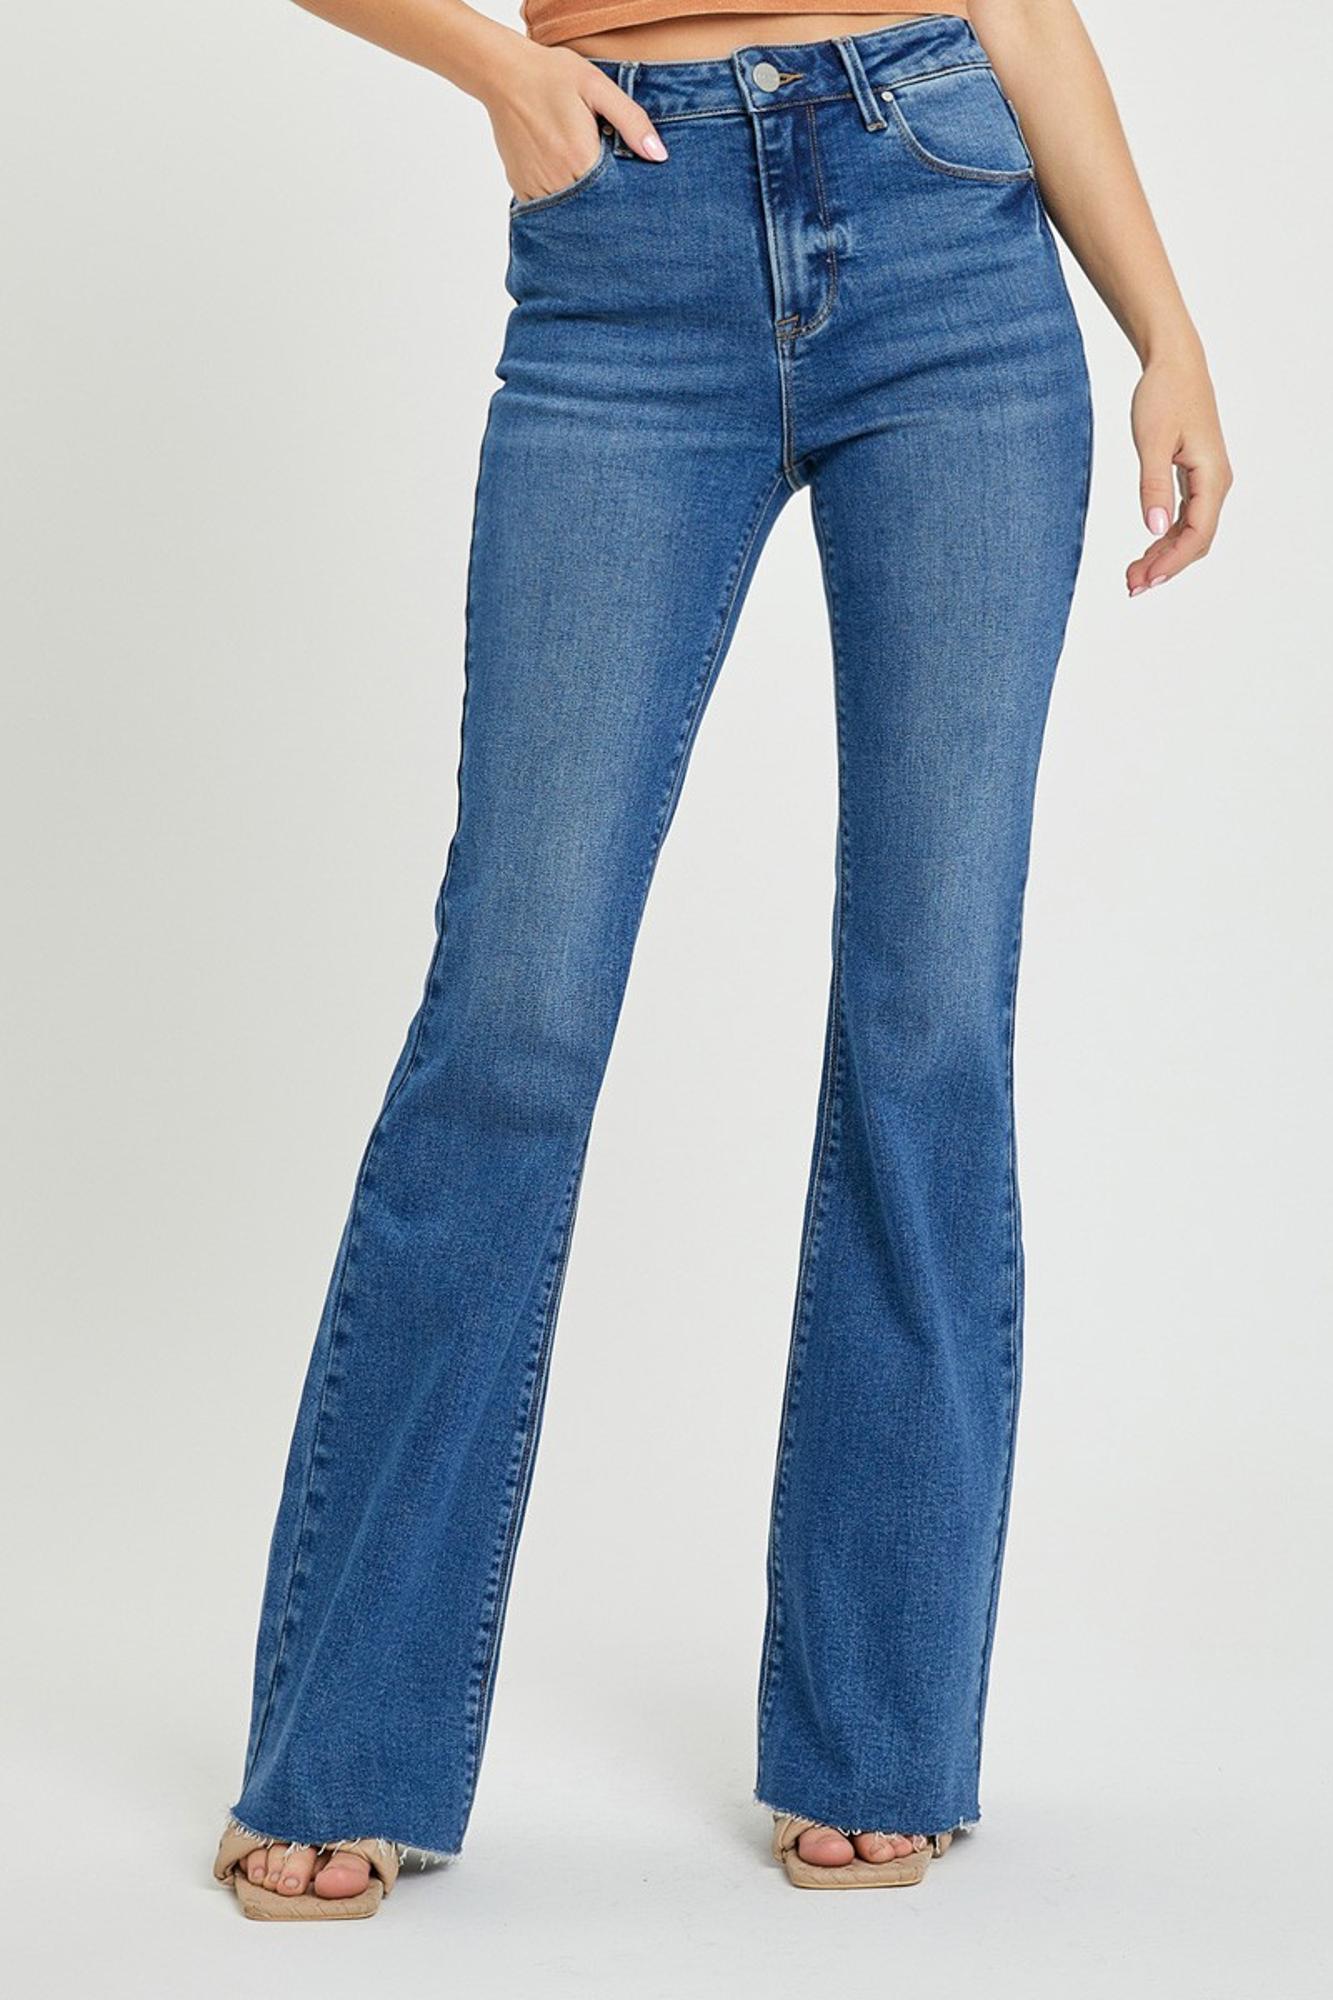 Vickie's Favorite High Rise Boot Cut Jeans